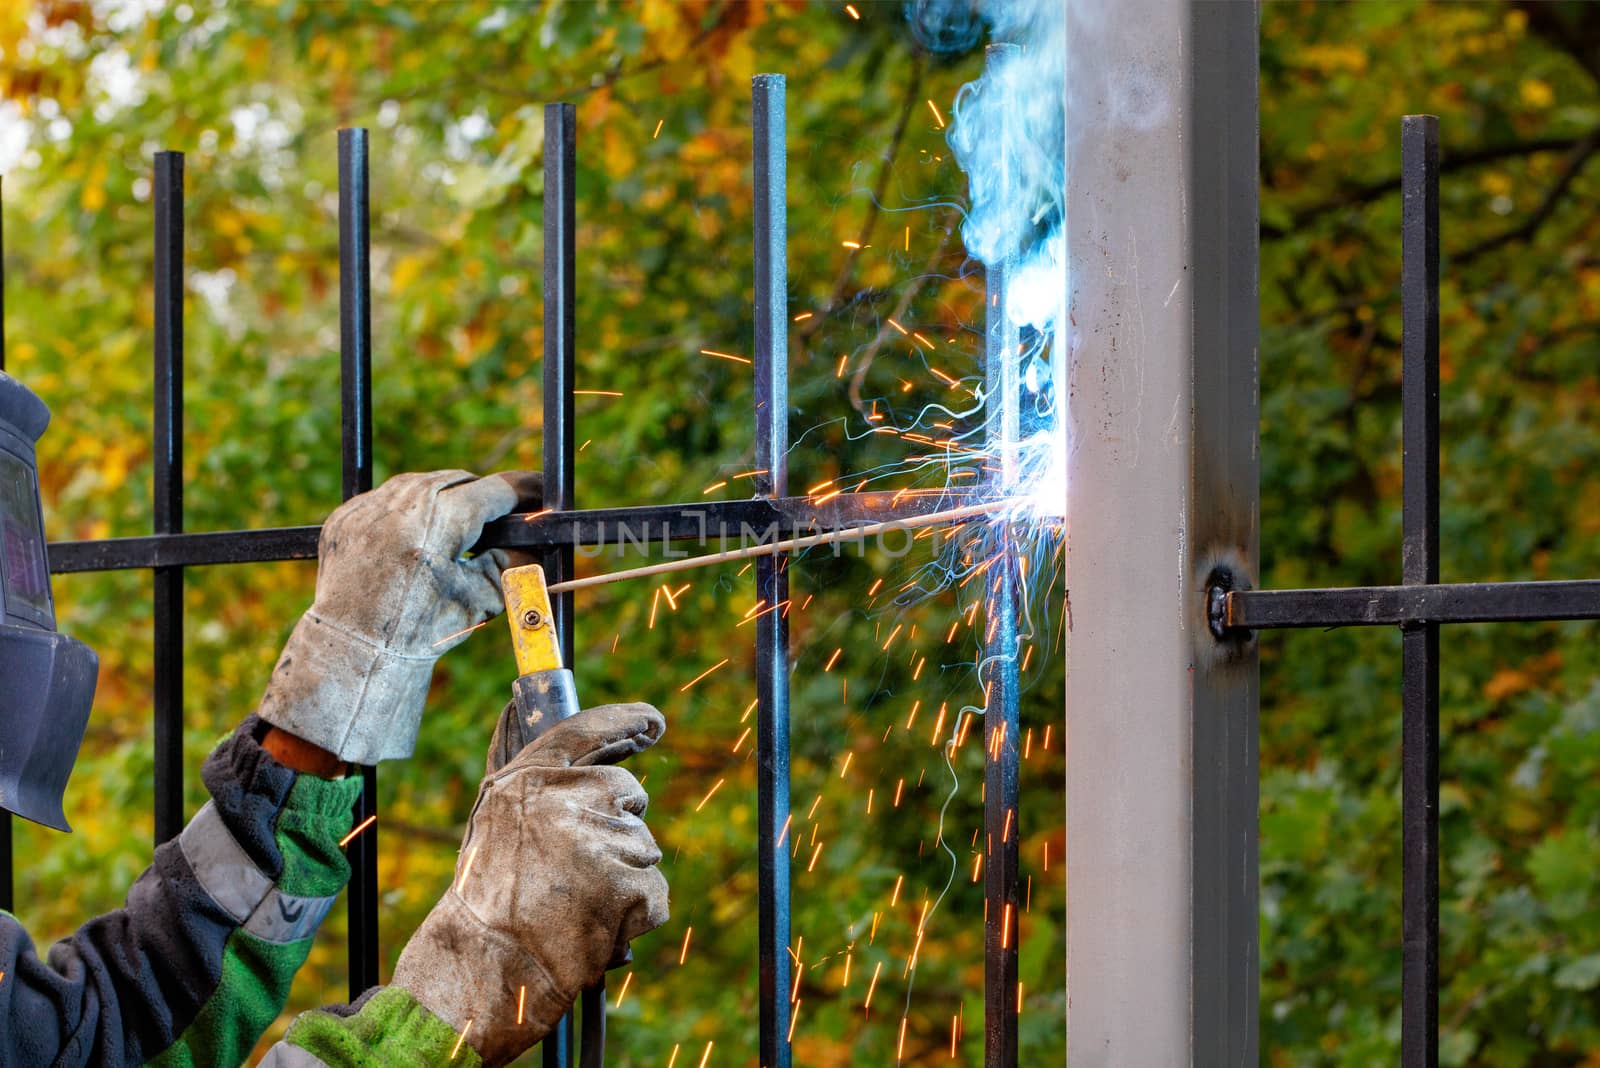 A welder in a protective helmet and gloves uses an electrode to weld a metal fence in a park area, against a blurred background of autumn greenery. Selective focus, copy space.